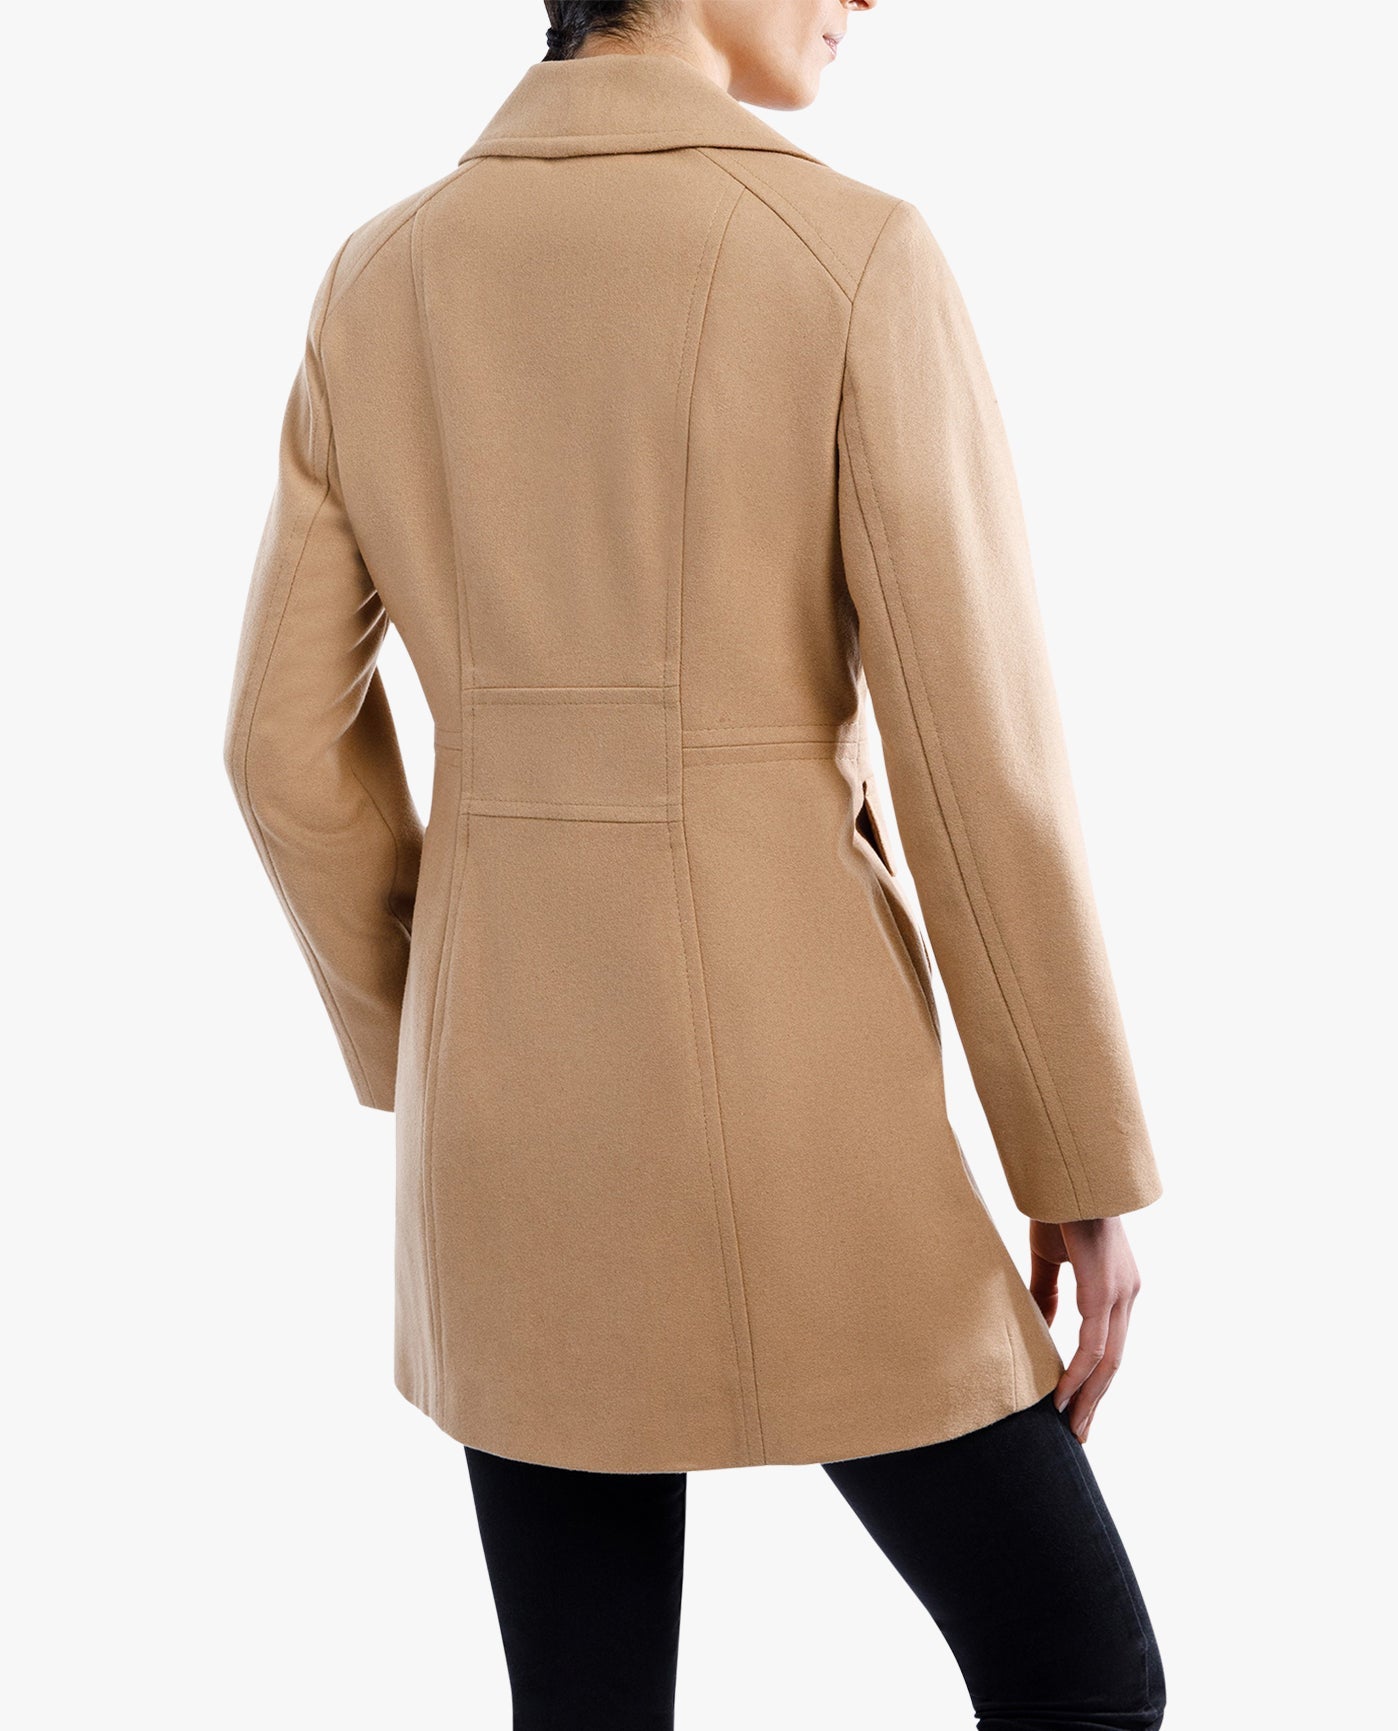 Back View Of SINGLE BREASTED PEACOAT | CAMEL